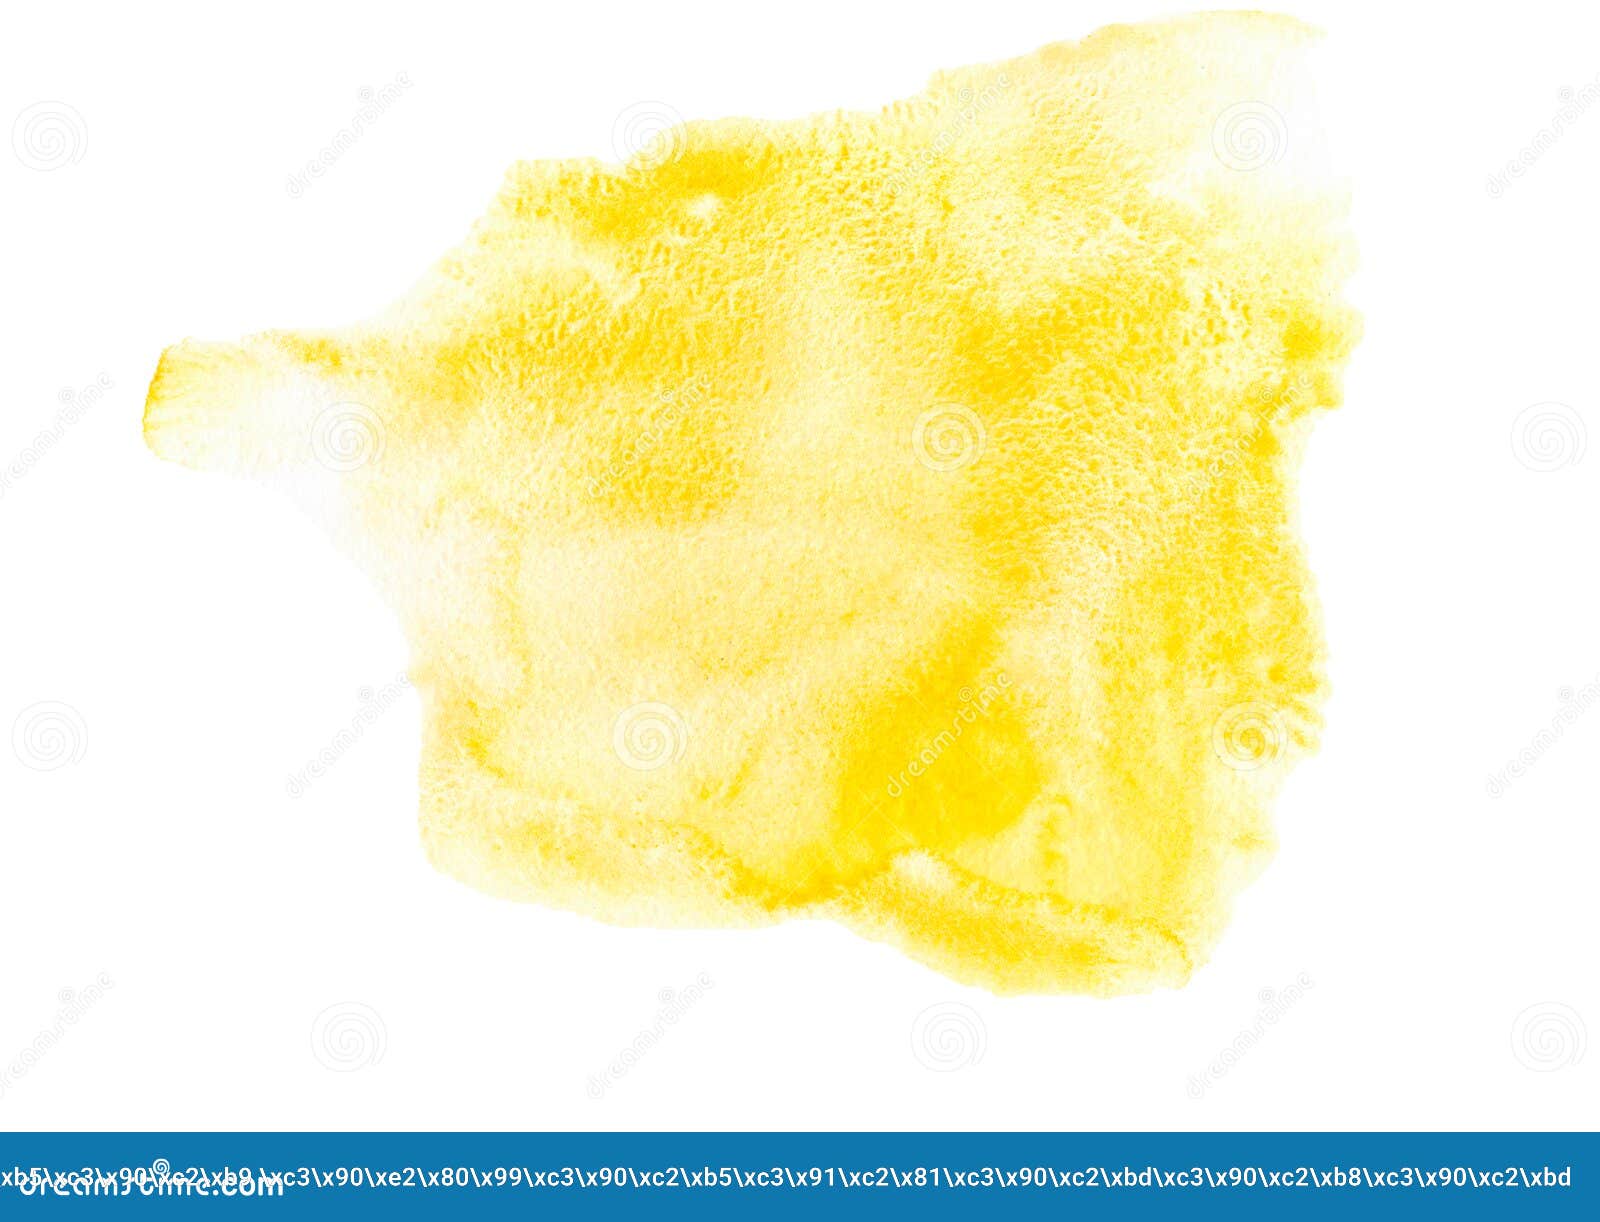 Hand Painted Abstract Yellow Watercolor on White Background Stock Image ...